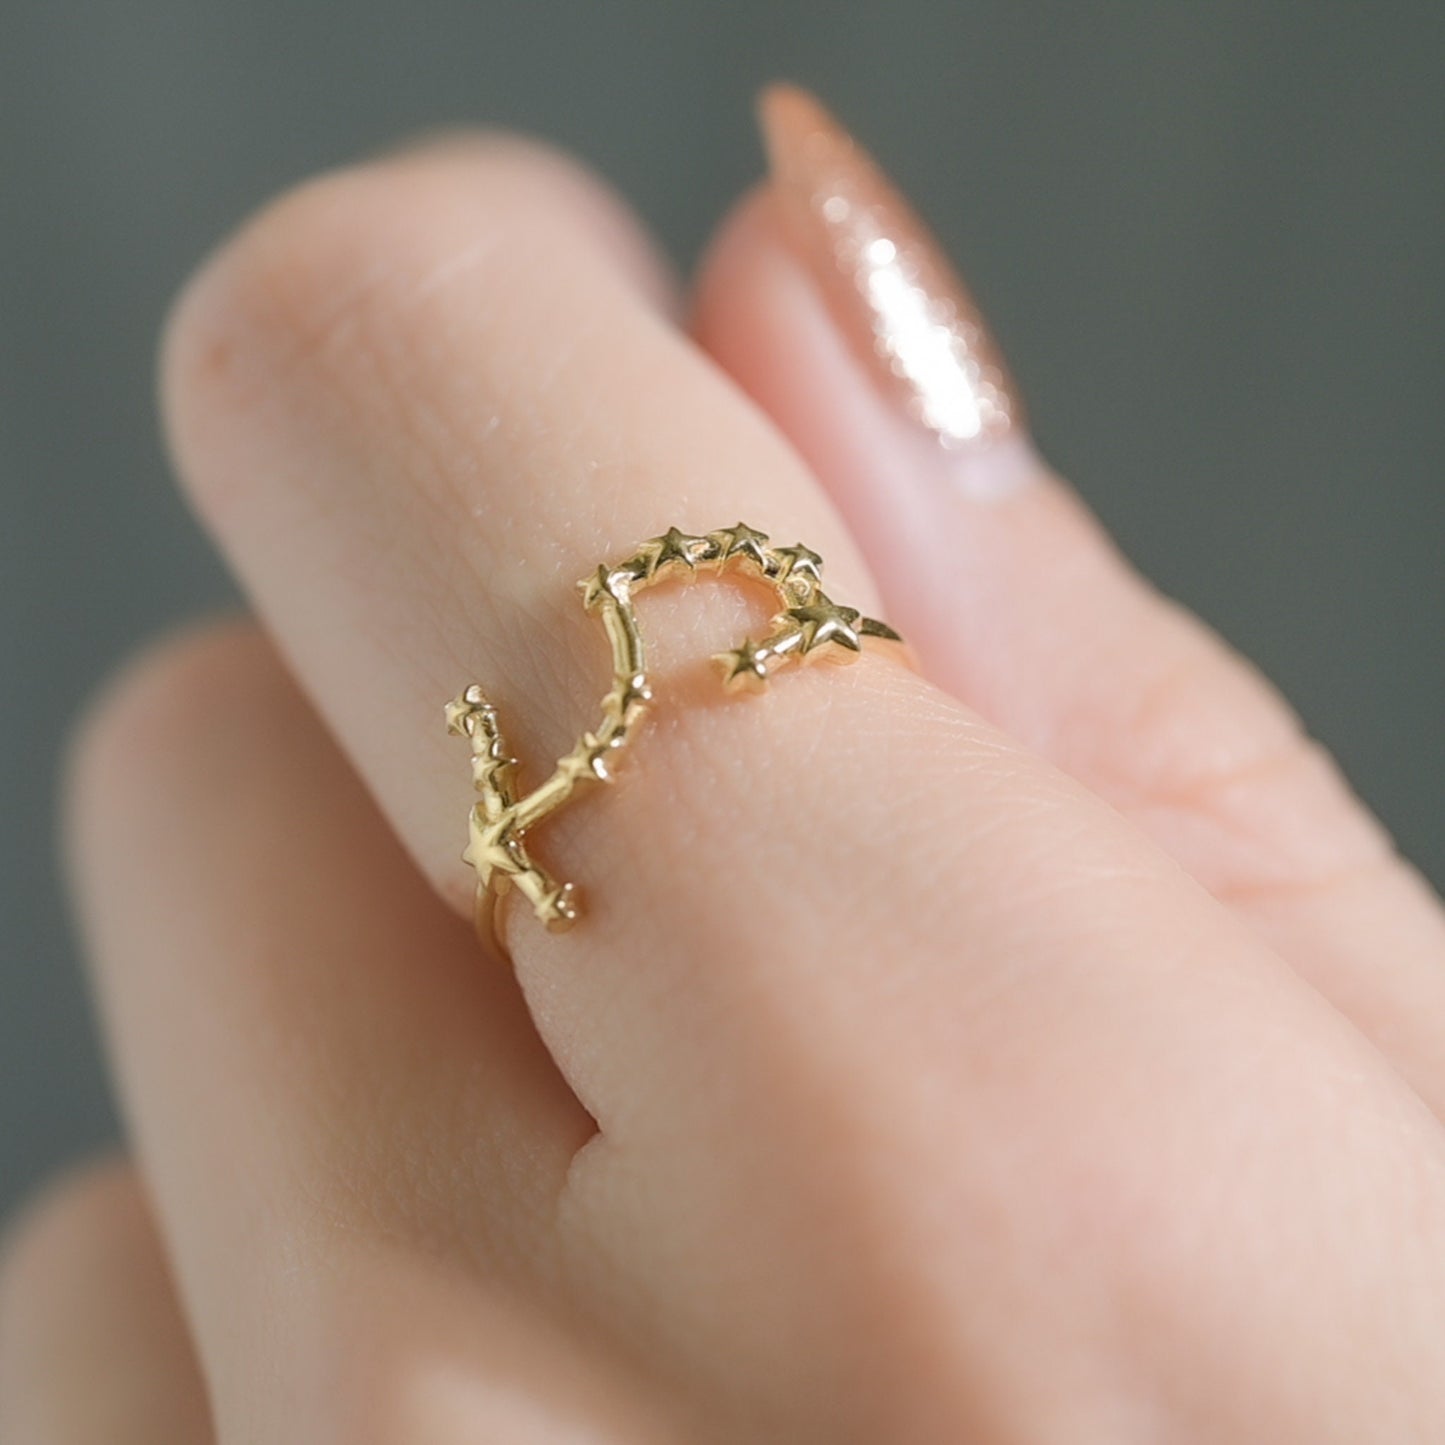 Solid Gold Scorpio, Star Sign Dainty Celestial Zodiac Ring in solid 14K Yellow Gold, 14k White Gold, 14K Rose Gold